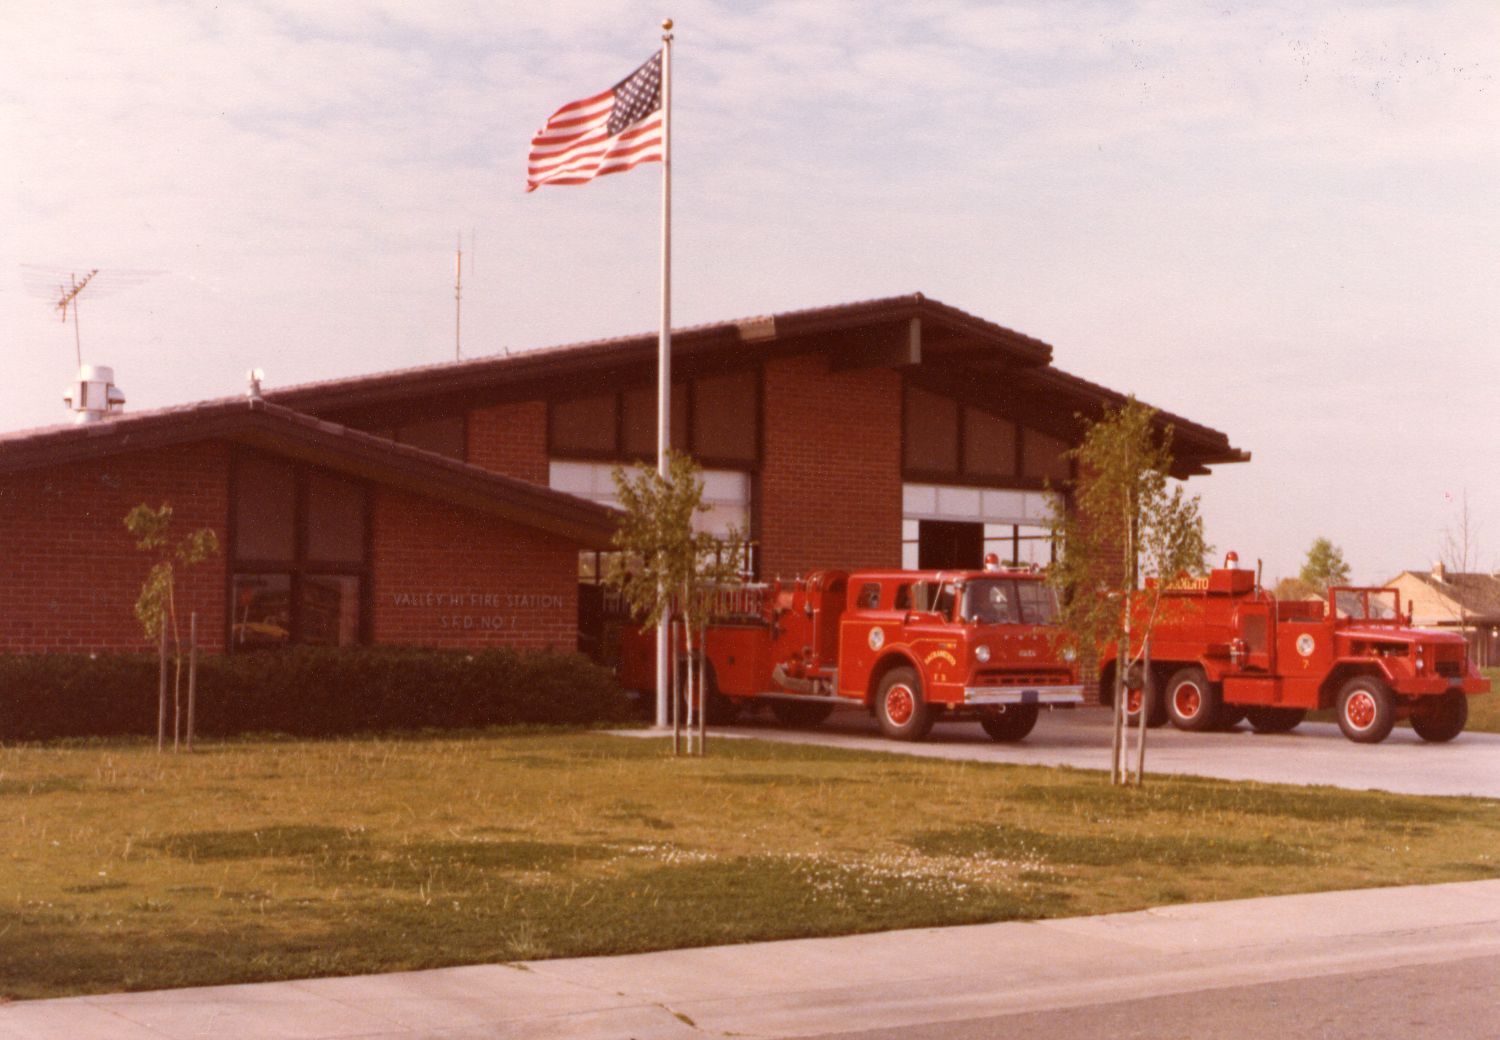 Sacramento Fire station 7 vintage photo of the front of the firehouse with engine and truck and flag flying above. 